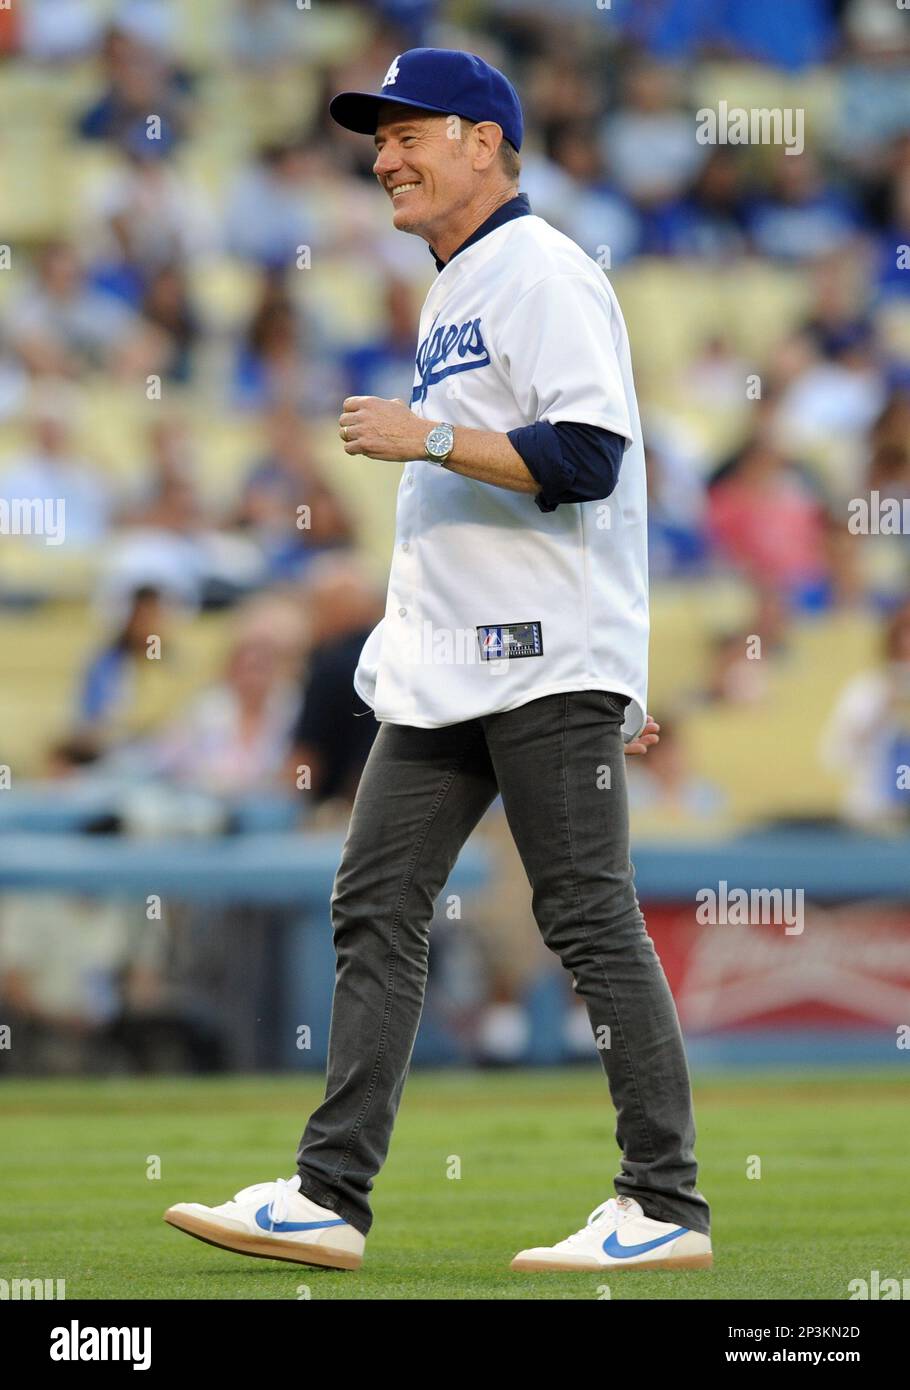 26 July 2013: Actor Bryan Cranston prior to throwing out the first pitch  during a Major League Baseball game between the Cincinnati Reds and the Los  Angeles Dodgers at Dodger Stadium in